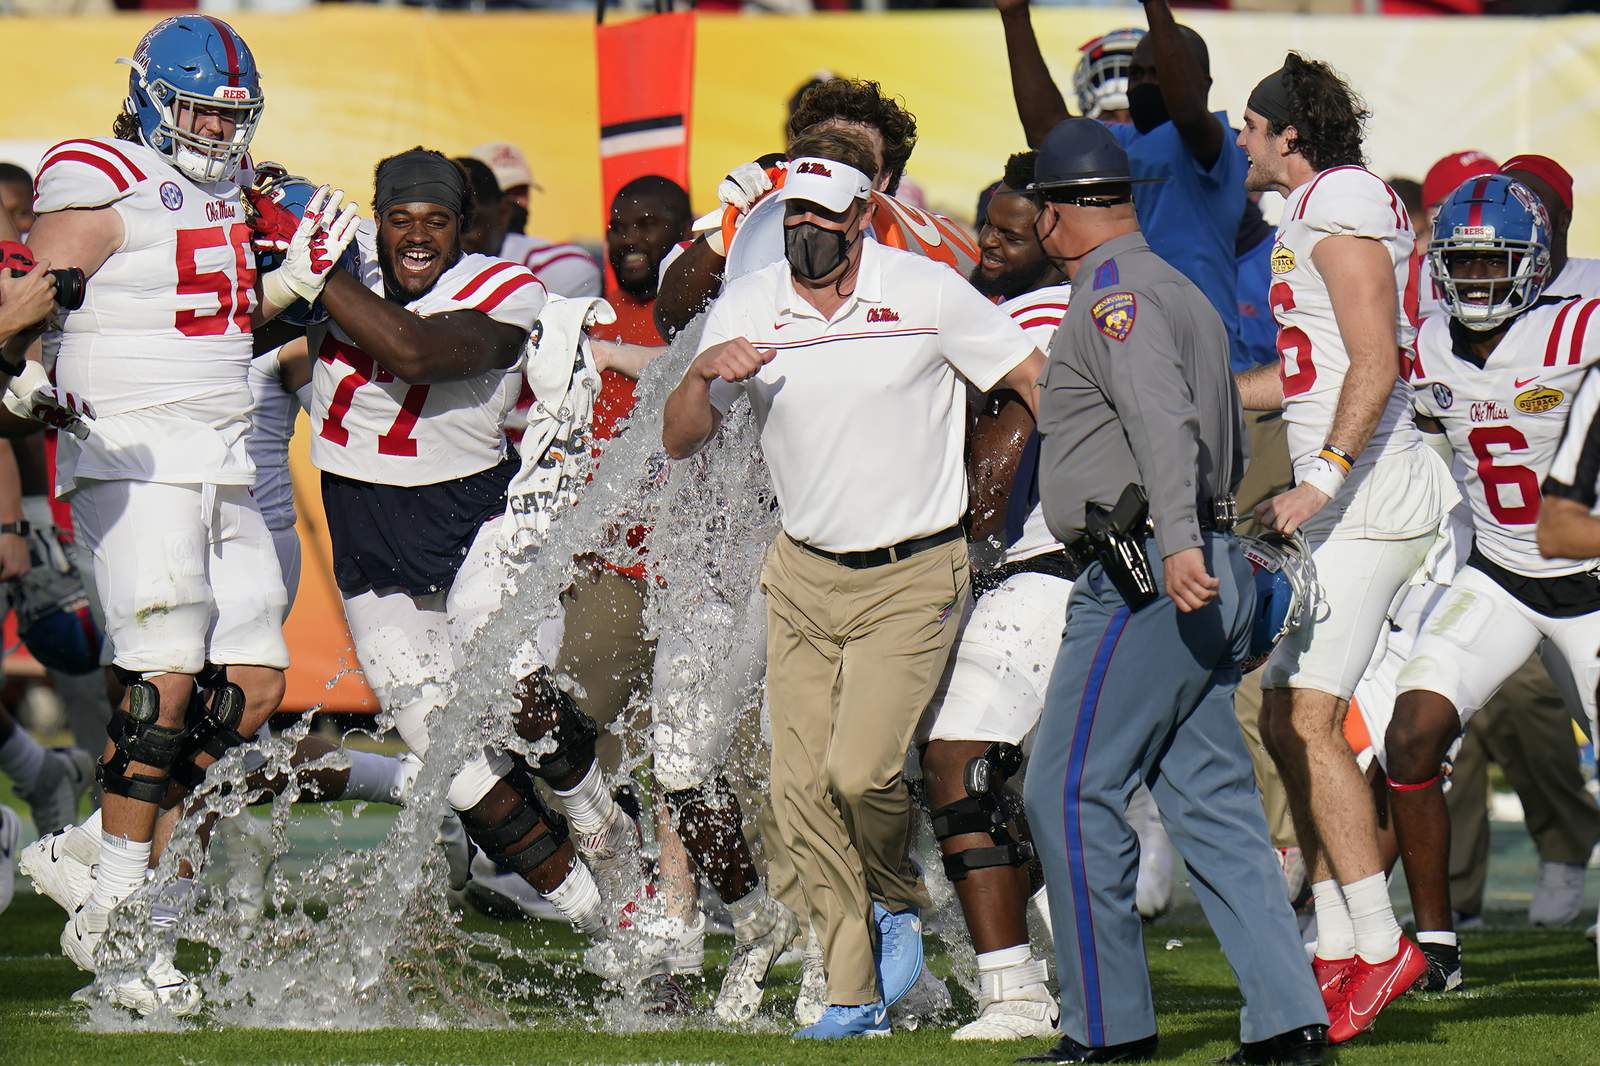 Corral, Ole Miss take down No. 7 Indiana in Outback Bowl